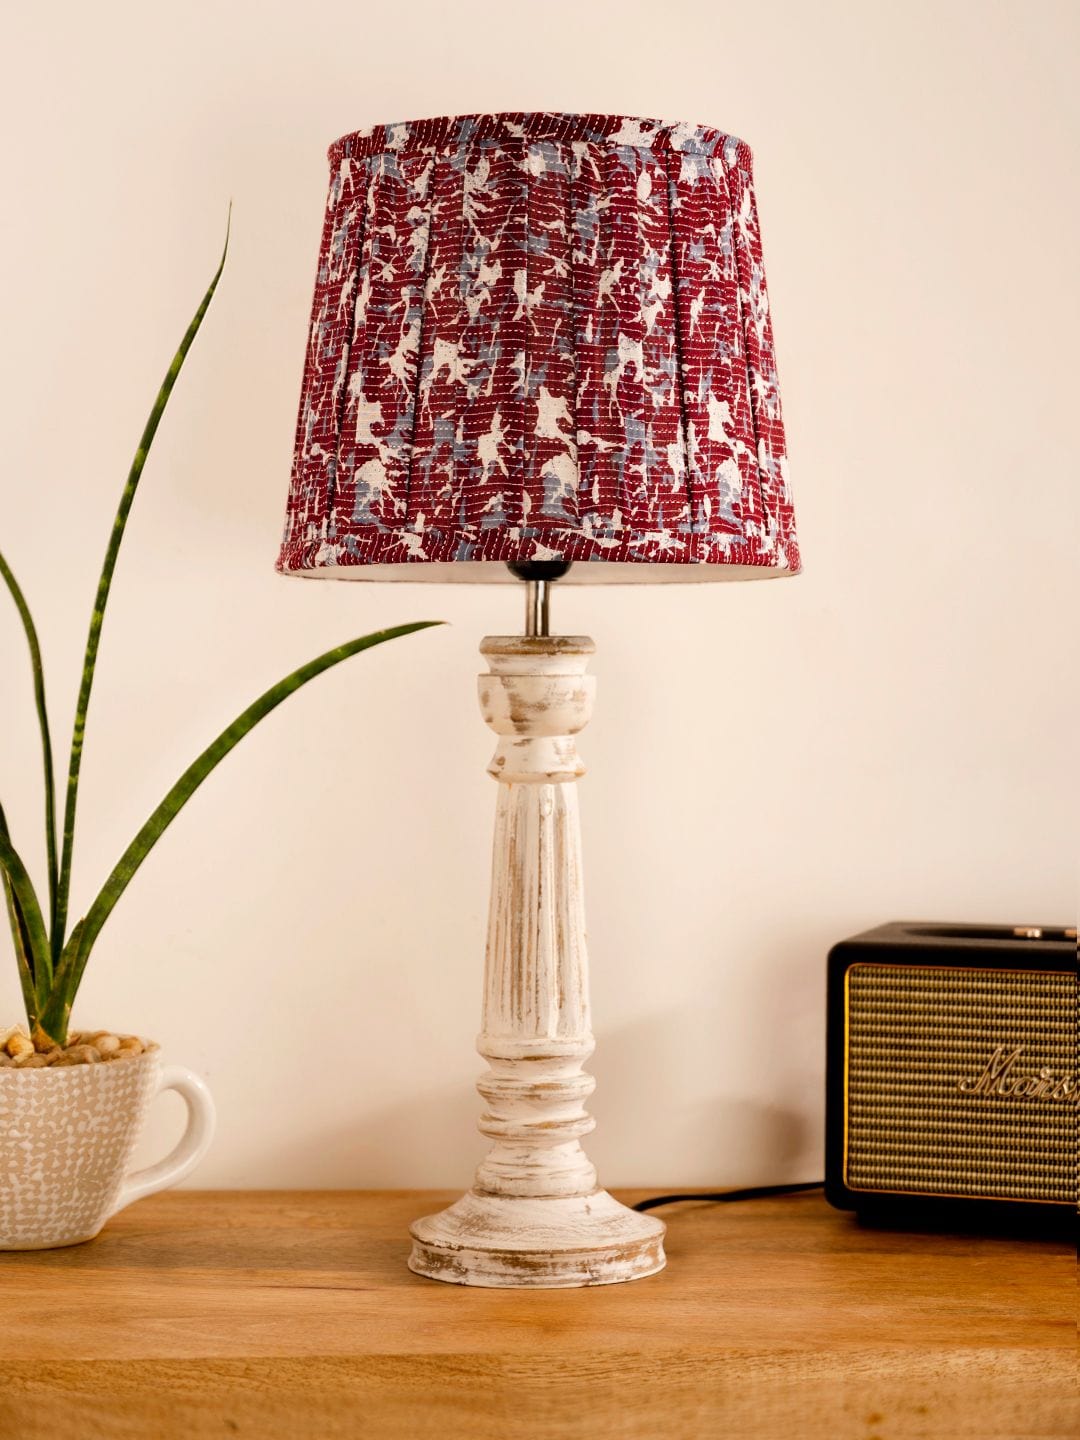 Wooden Pillar White lamp with pleeted Colorful Soft Shade